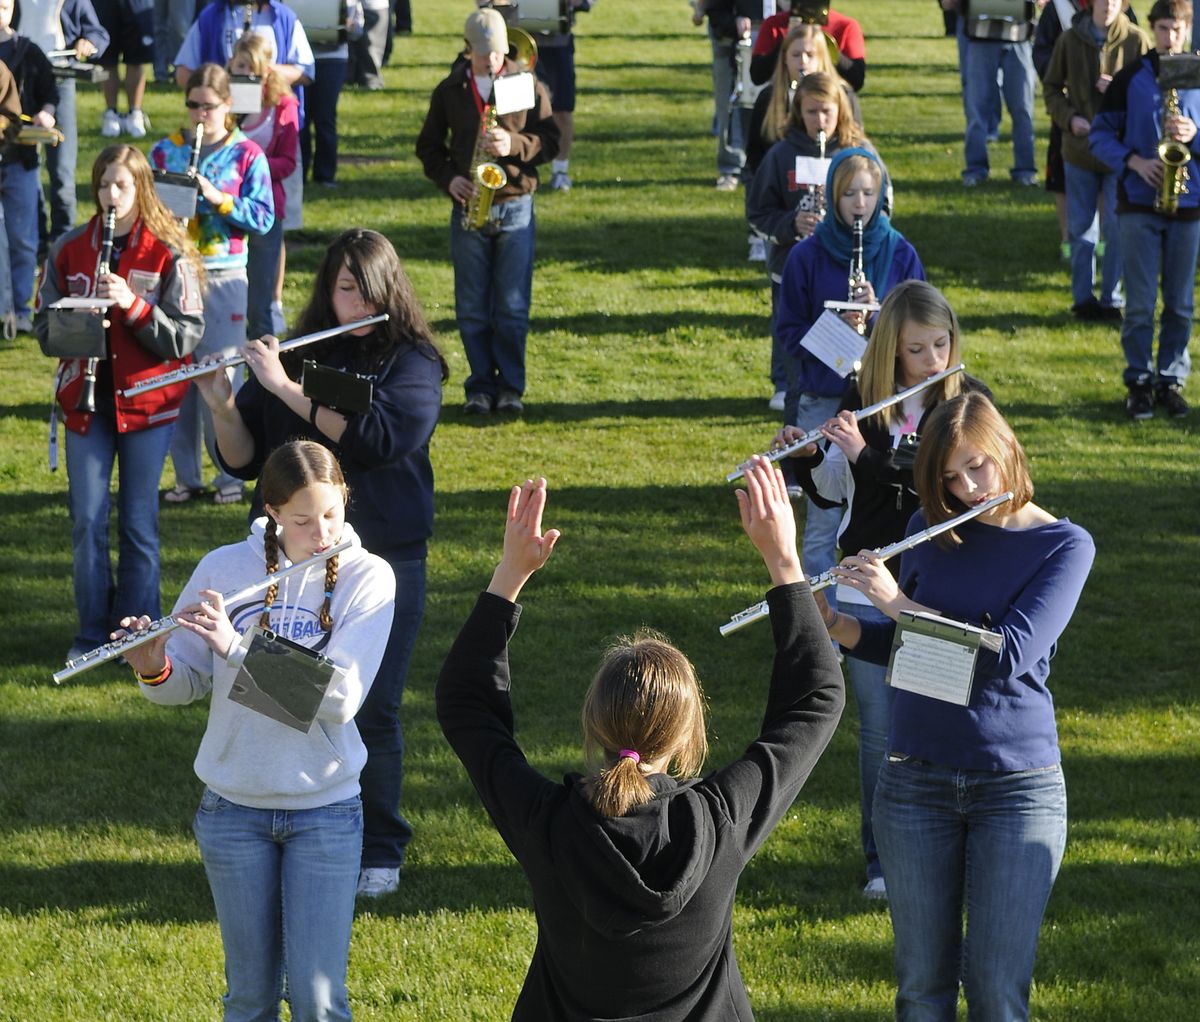 Riverside High School marching band drum major Kim Fry, 18, directs the early-morning practice of the combined bands of Riverside and Deer Park high schools Tuesday, May 11, 2010, at Riverside. Mykaela Hendrix, 15, of Deer Park, front left, and her school mates joined Kim Seitz, 18, of Riverside, front right, for their first practice together on Tuesday. (Dan Pelle / The Spokesman-Review)